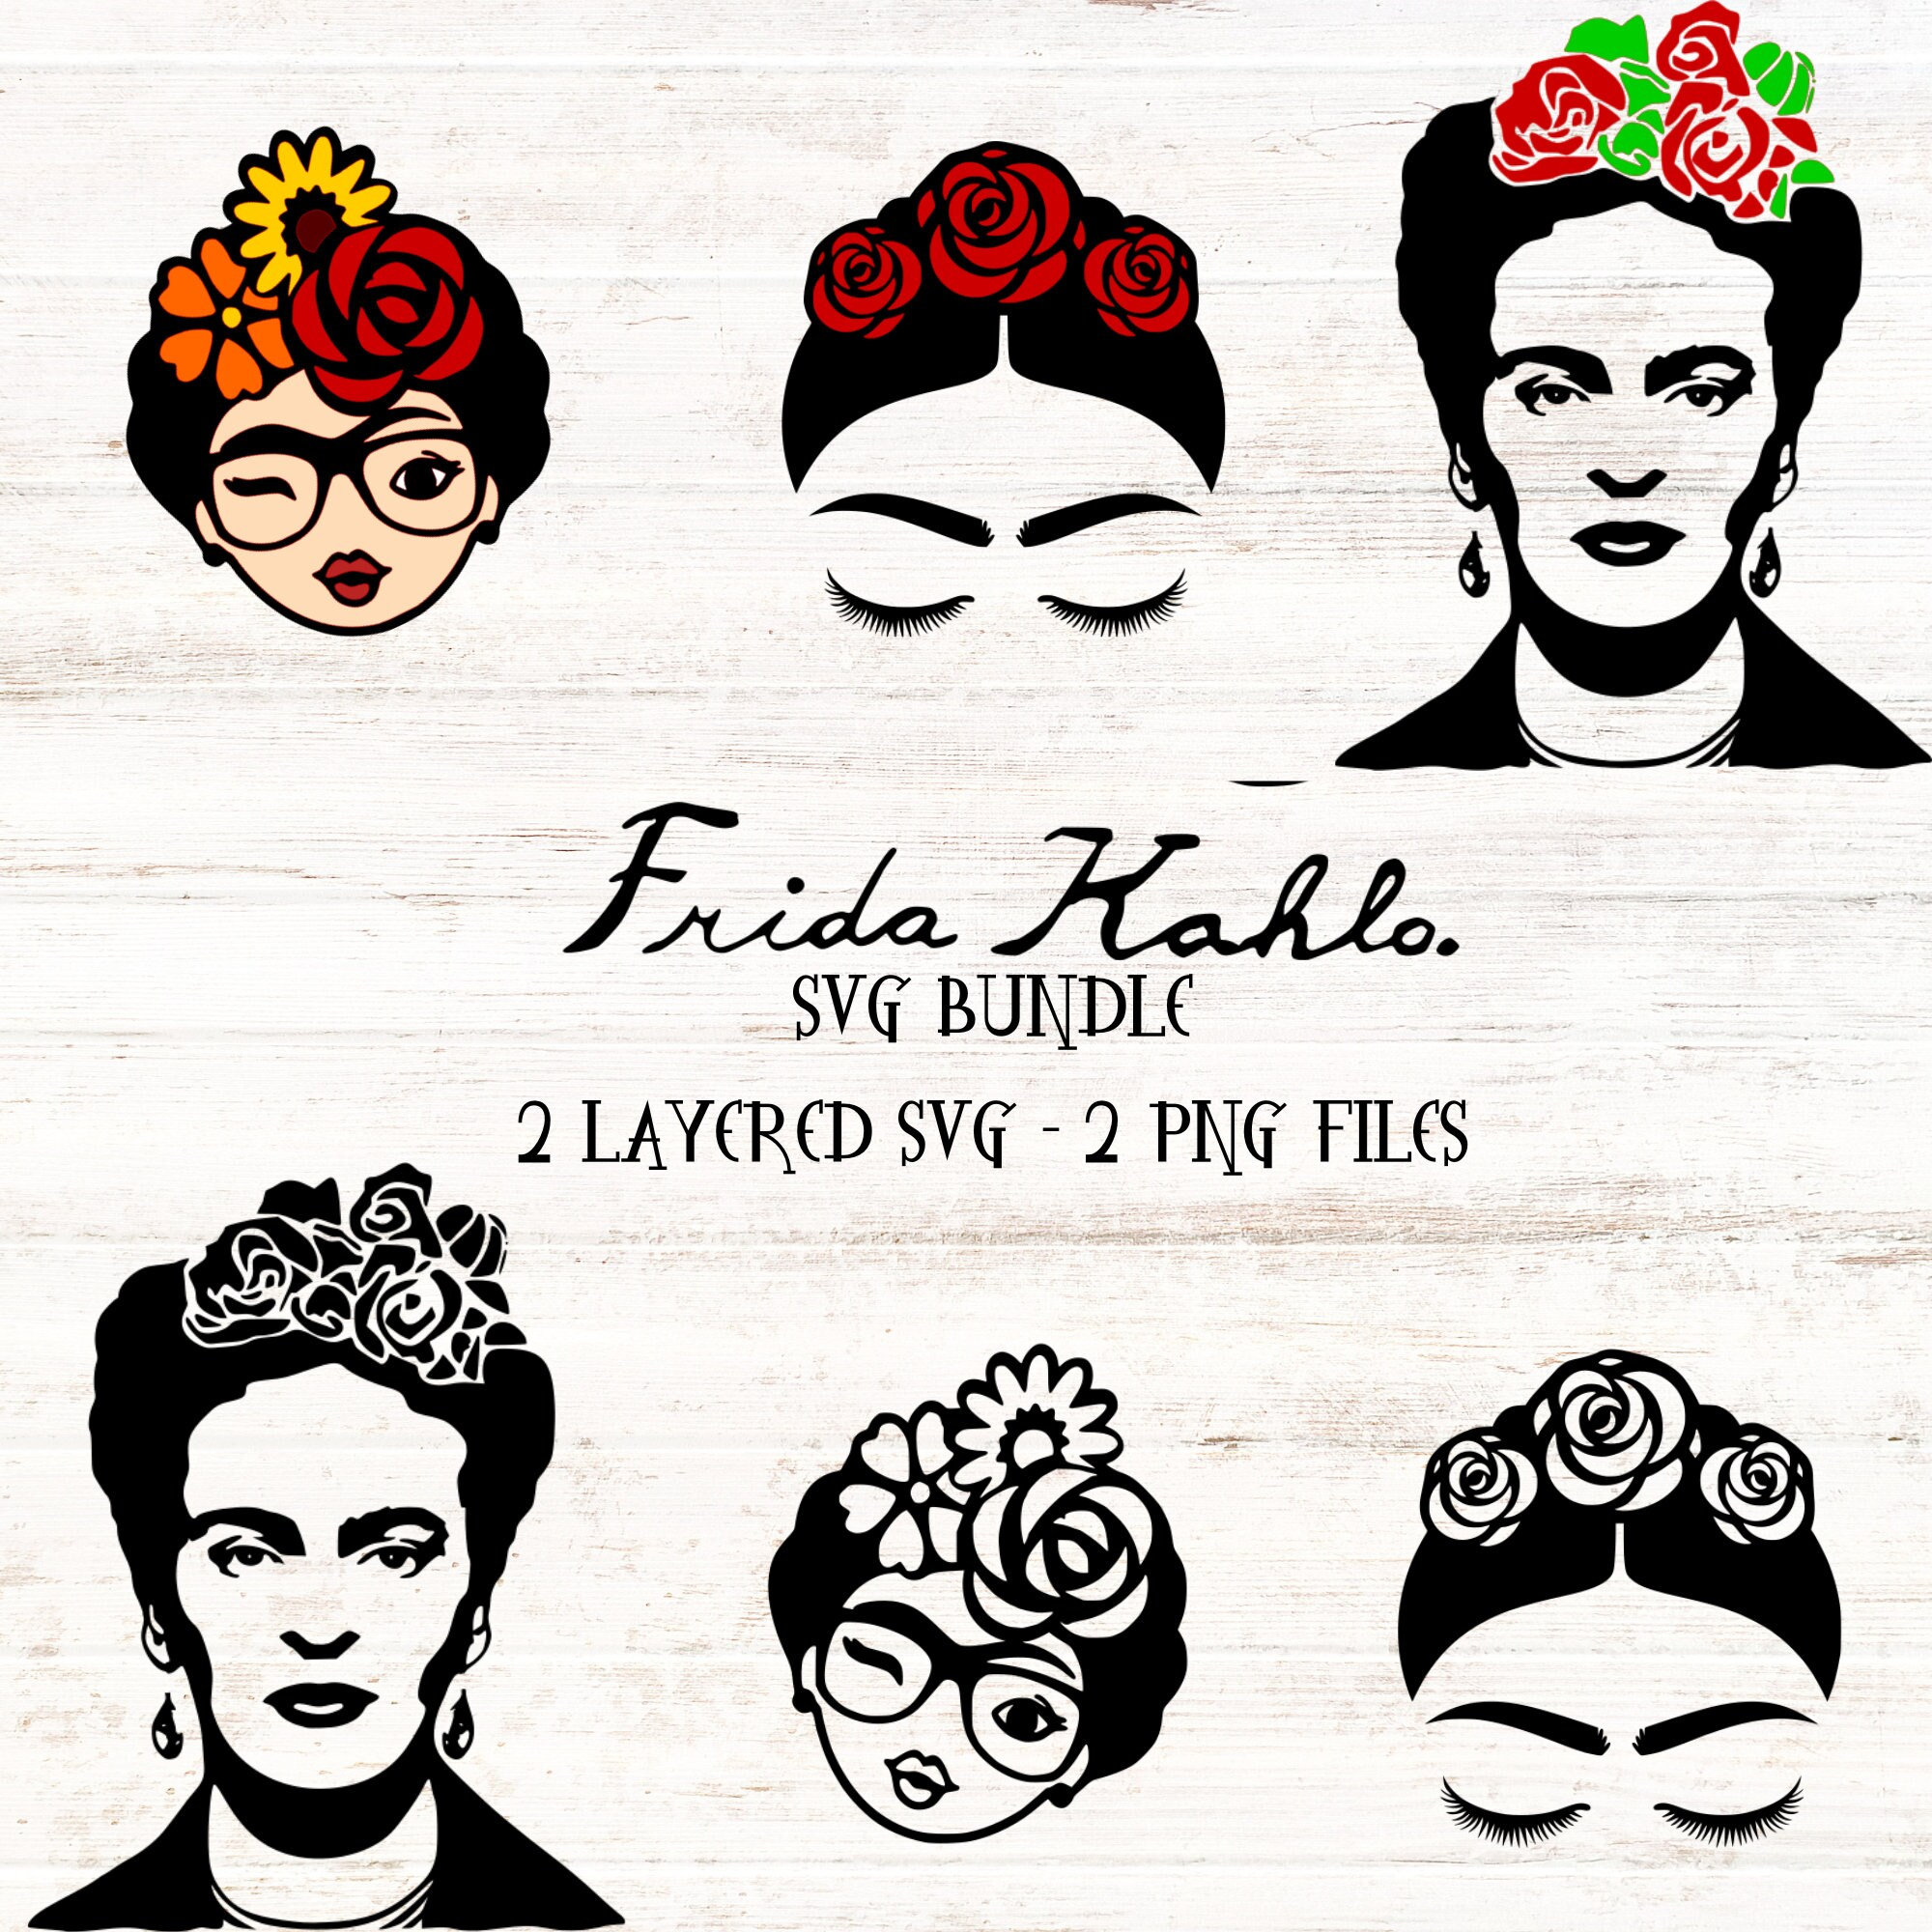 14 Nose Frida Images, Stock Photos, 3D objects, & Vectors